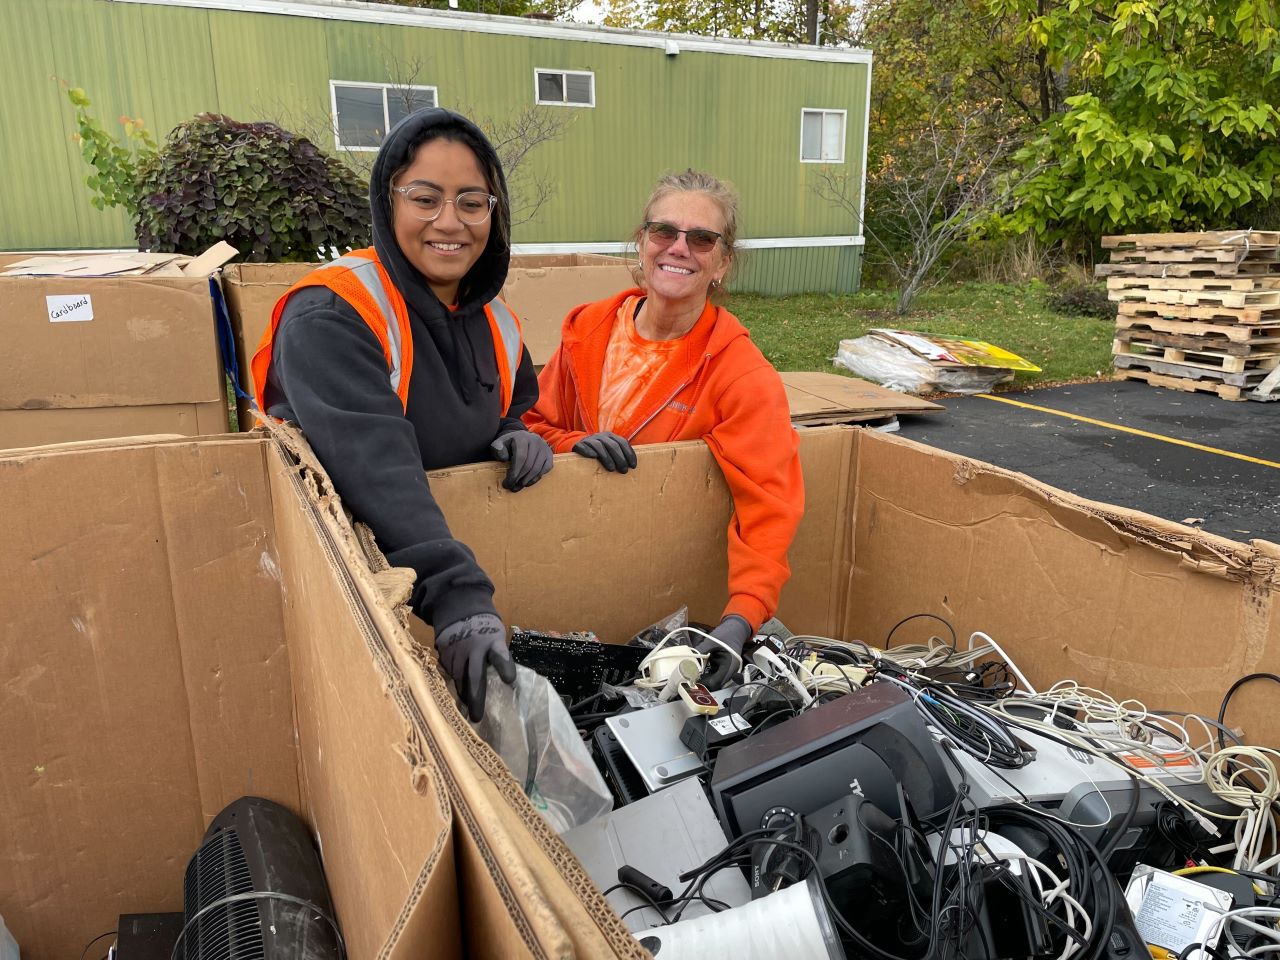 Two University of Rochester volunteers in front of a box filled with recycled electronic devices like monitors, computers, etc.